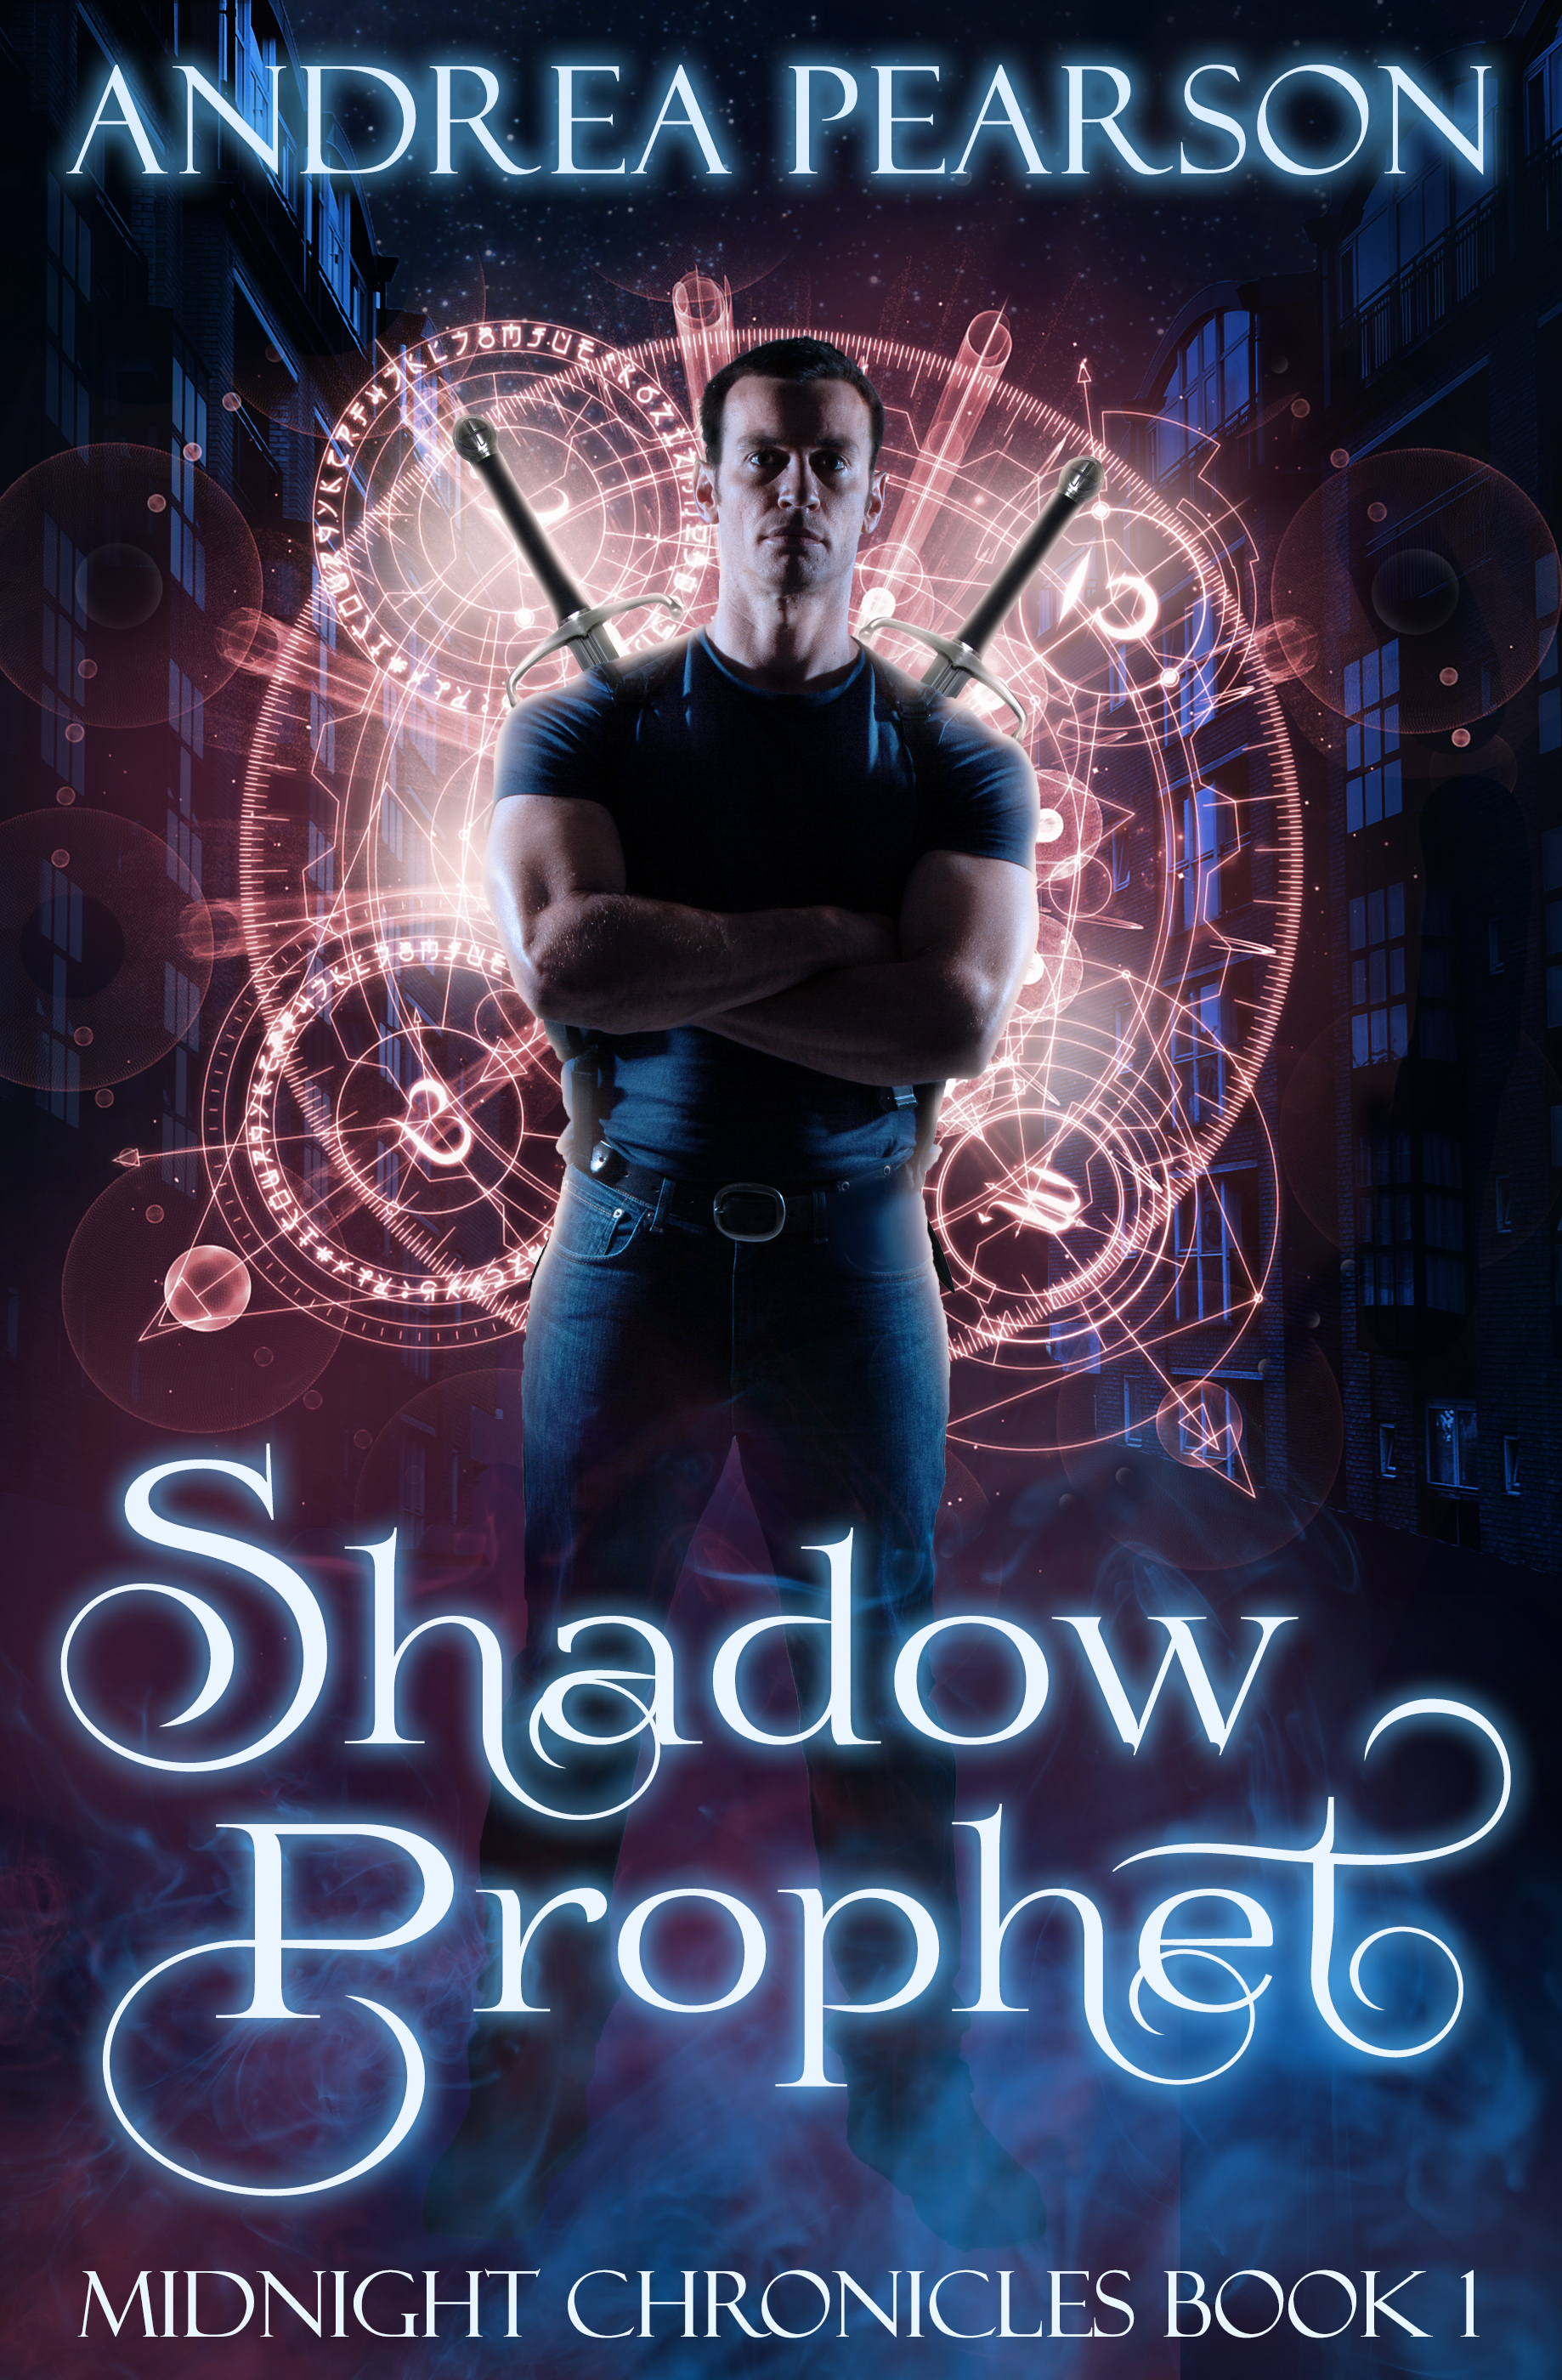 FREE: The Shadow Prophet by Andrea Pearson